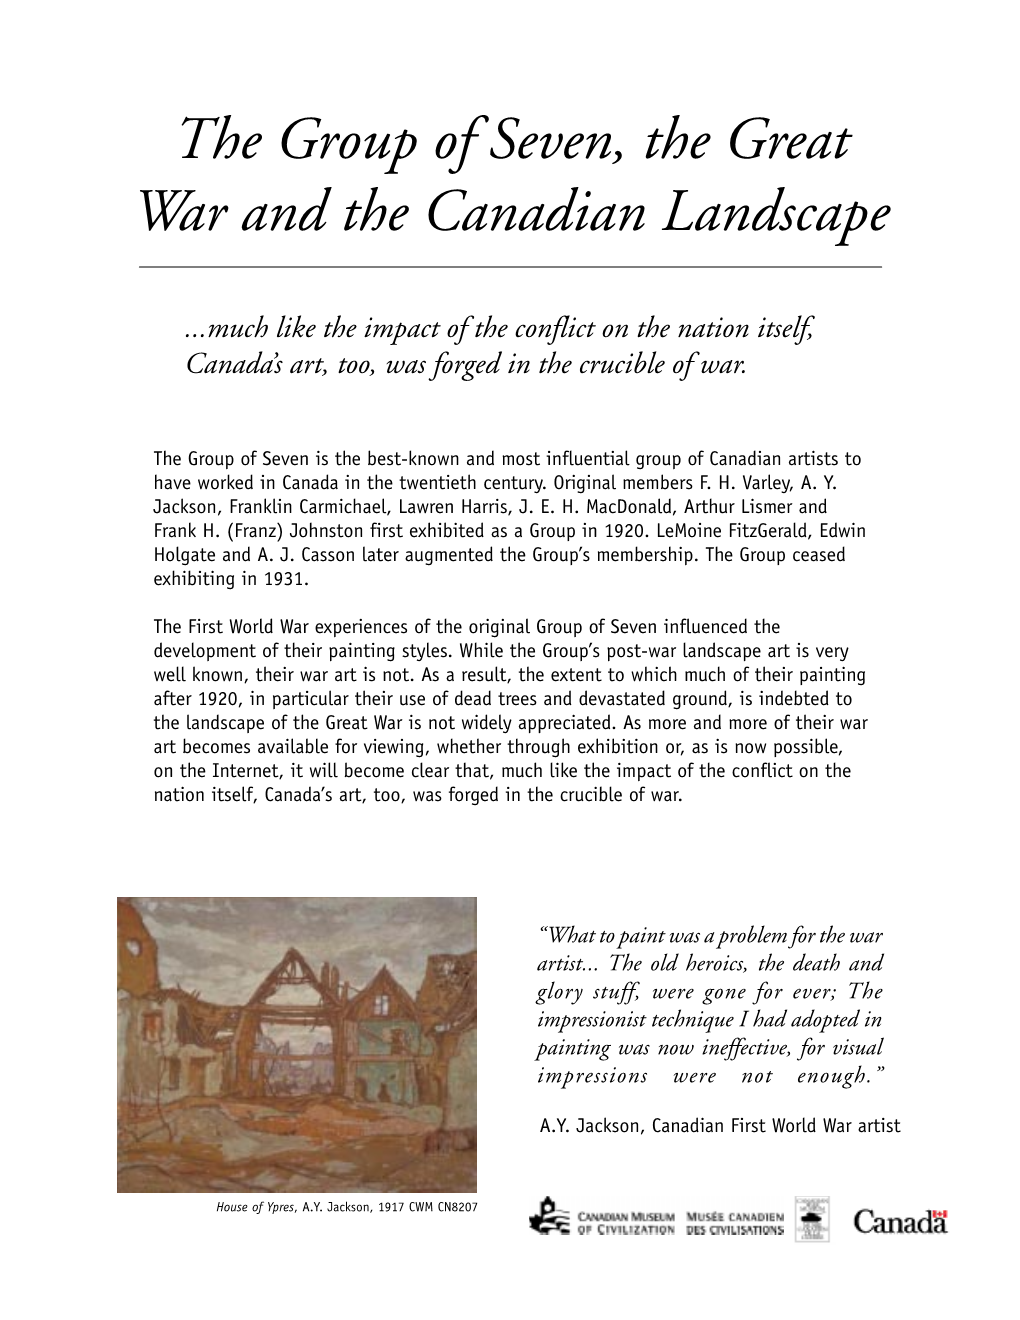 The Group of Seven, the Great War and the Canadian Landscape